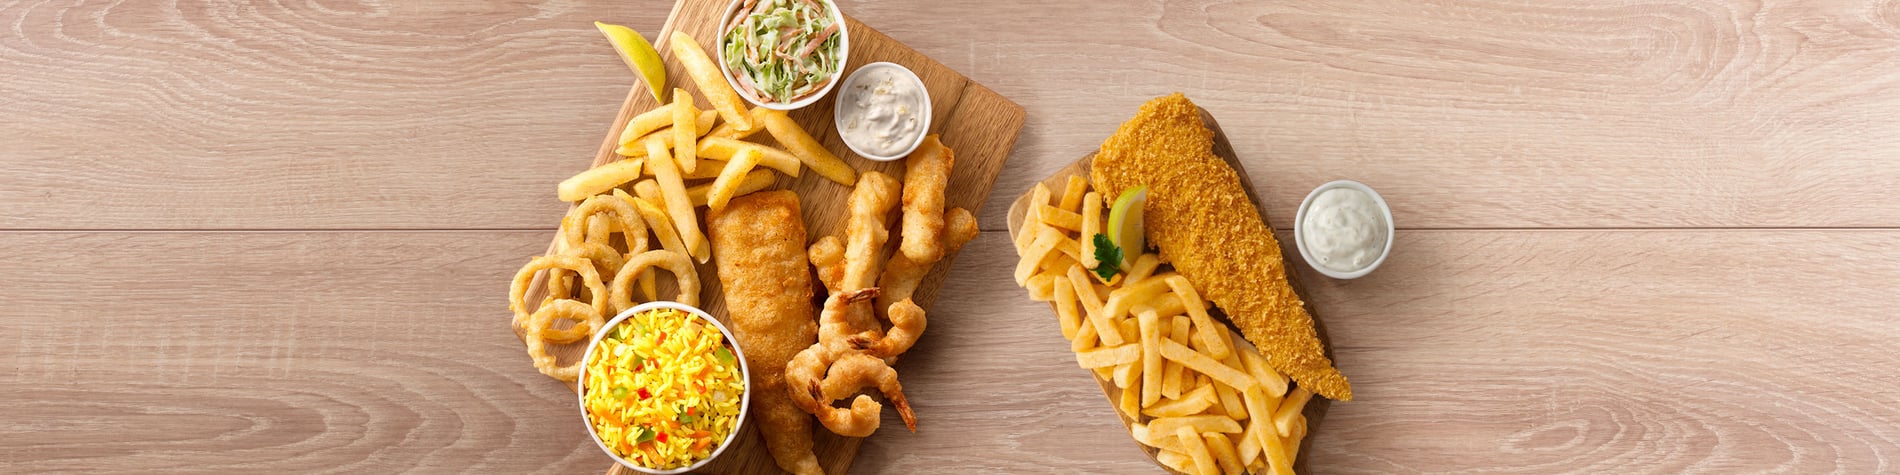 Seafood meals from Fishaways Wilgeheuwel including a Crunchy Fish and Chips meal and a seafood Platter for One with hake, calamari, prawns, chips, onion rings, and coleslaw.